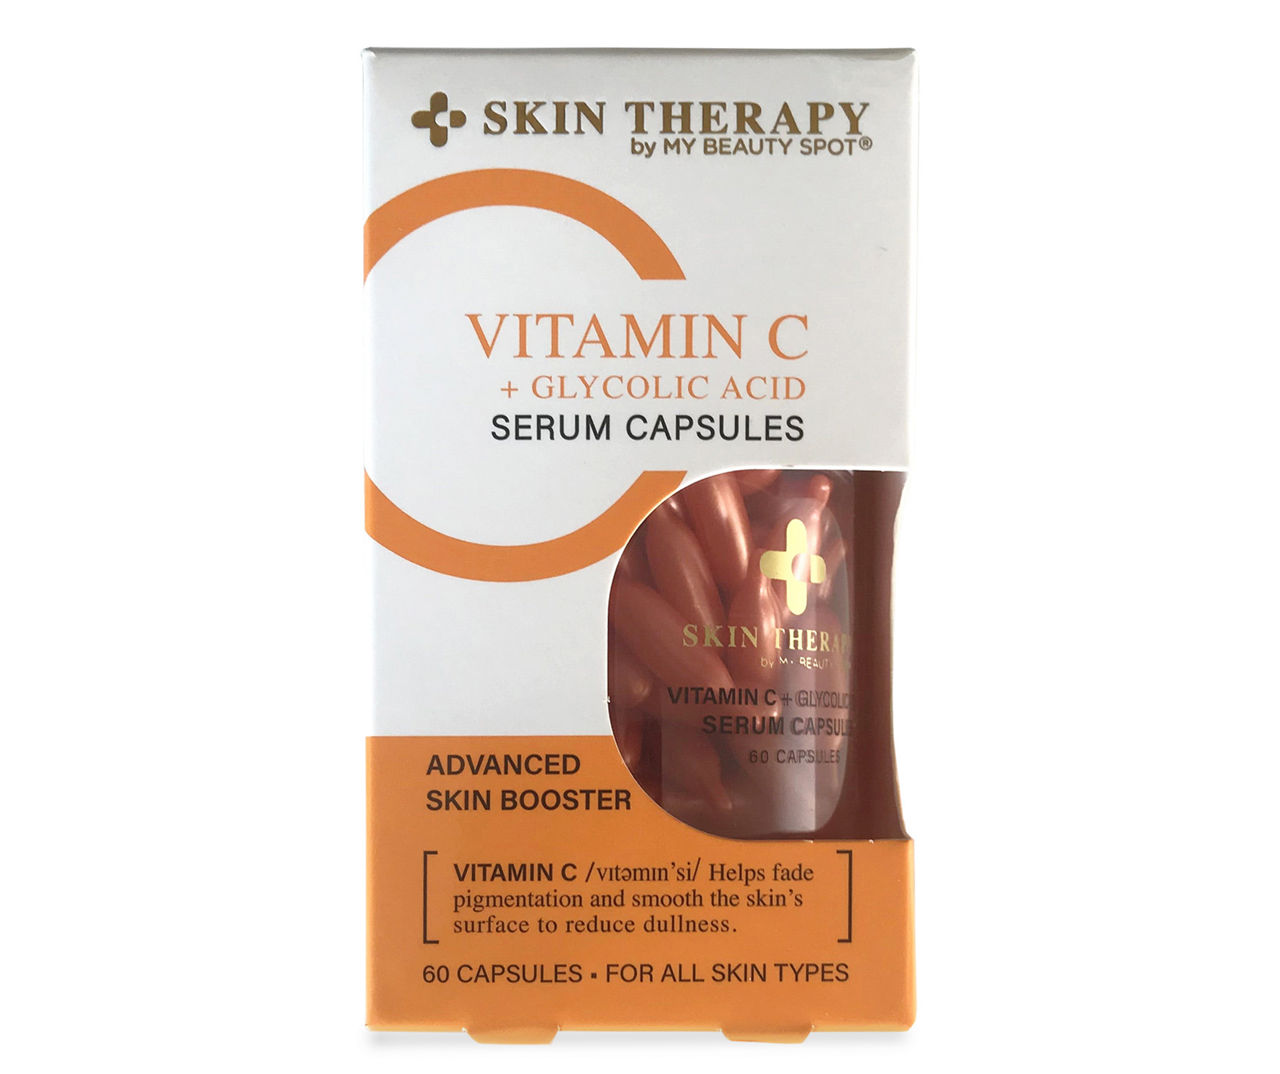 My Beauty Spot Vitamin C & Glycolic Serum Advanced Skin Booster Capsules, 60-Count Big Lots